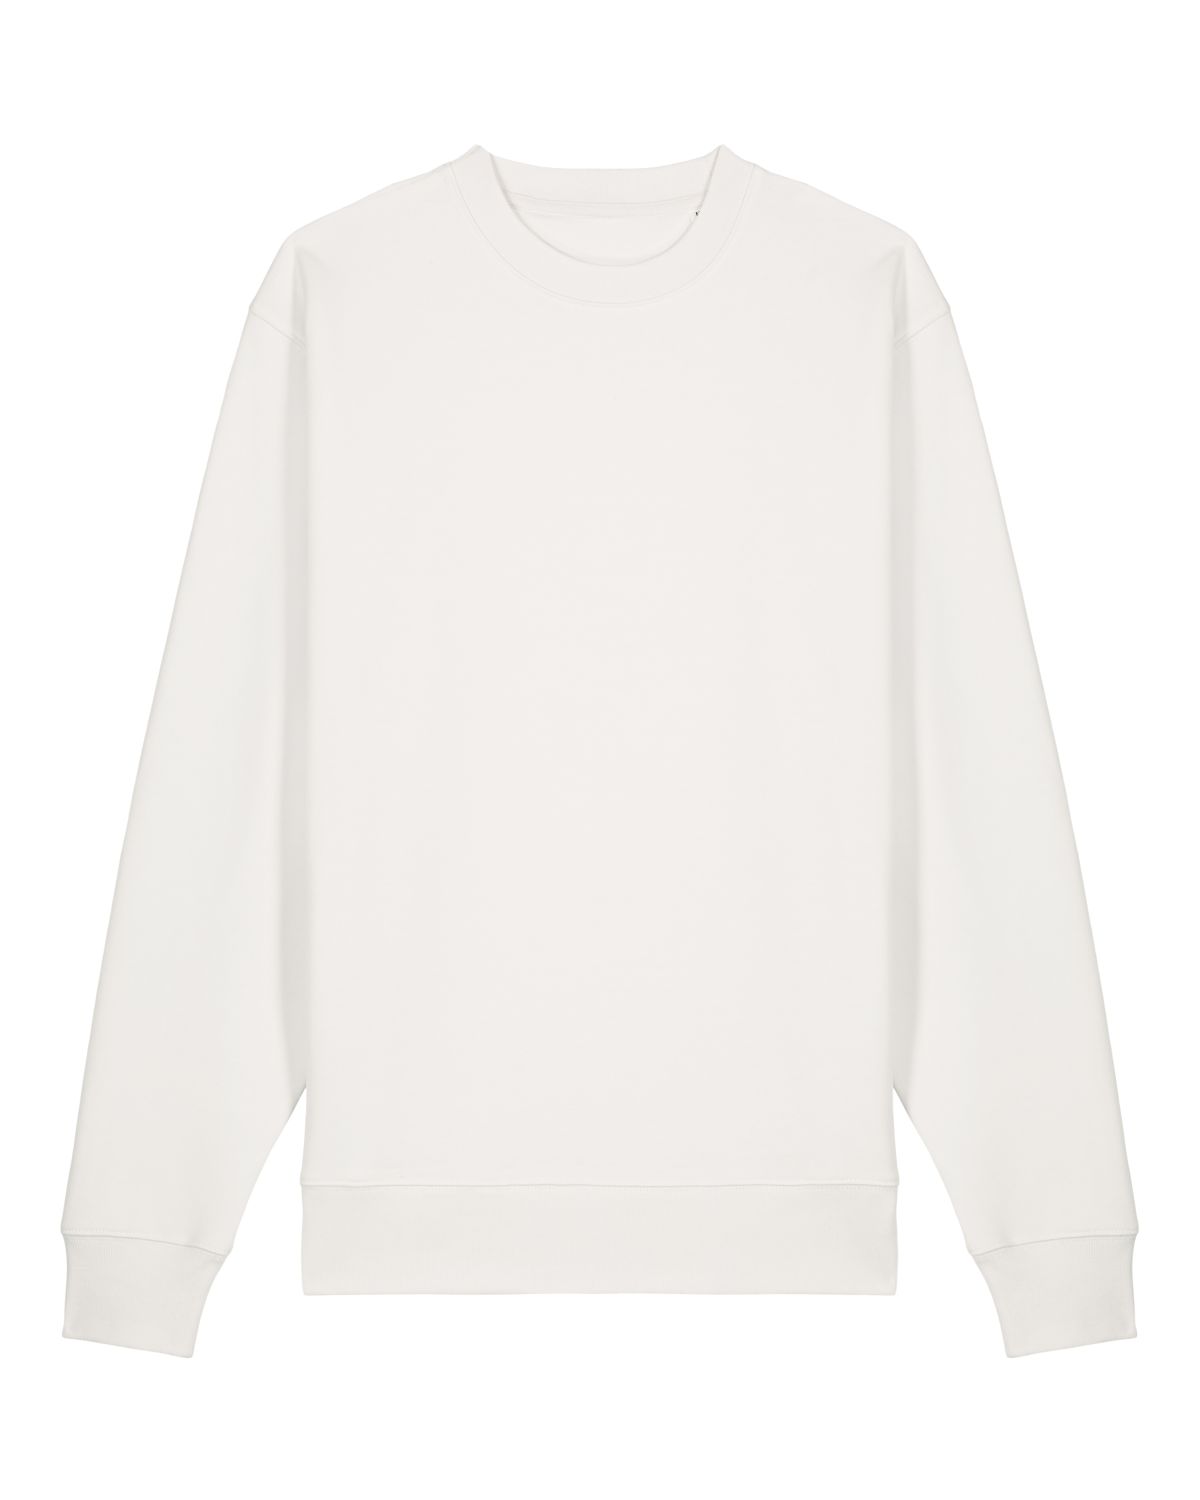 Customize your own sustainable college sweater made of 100% GOTS-certified organic cotton